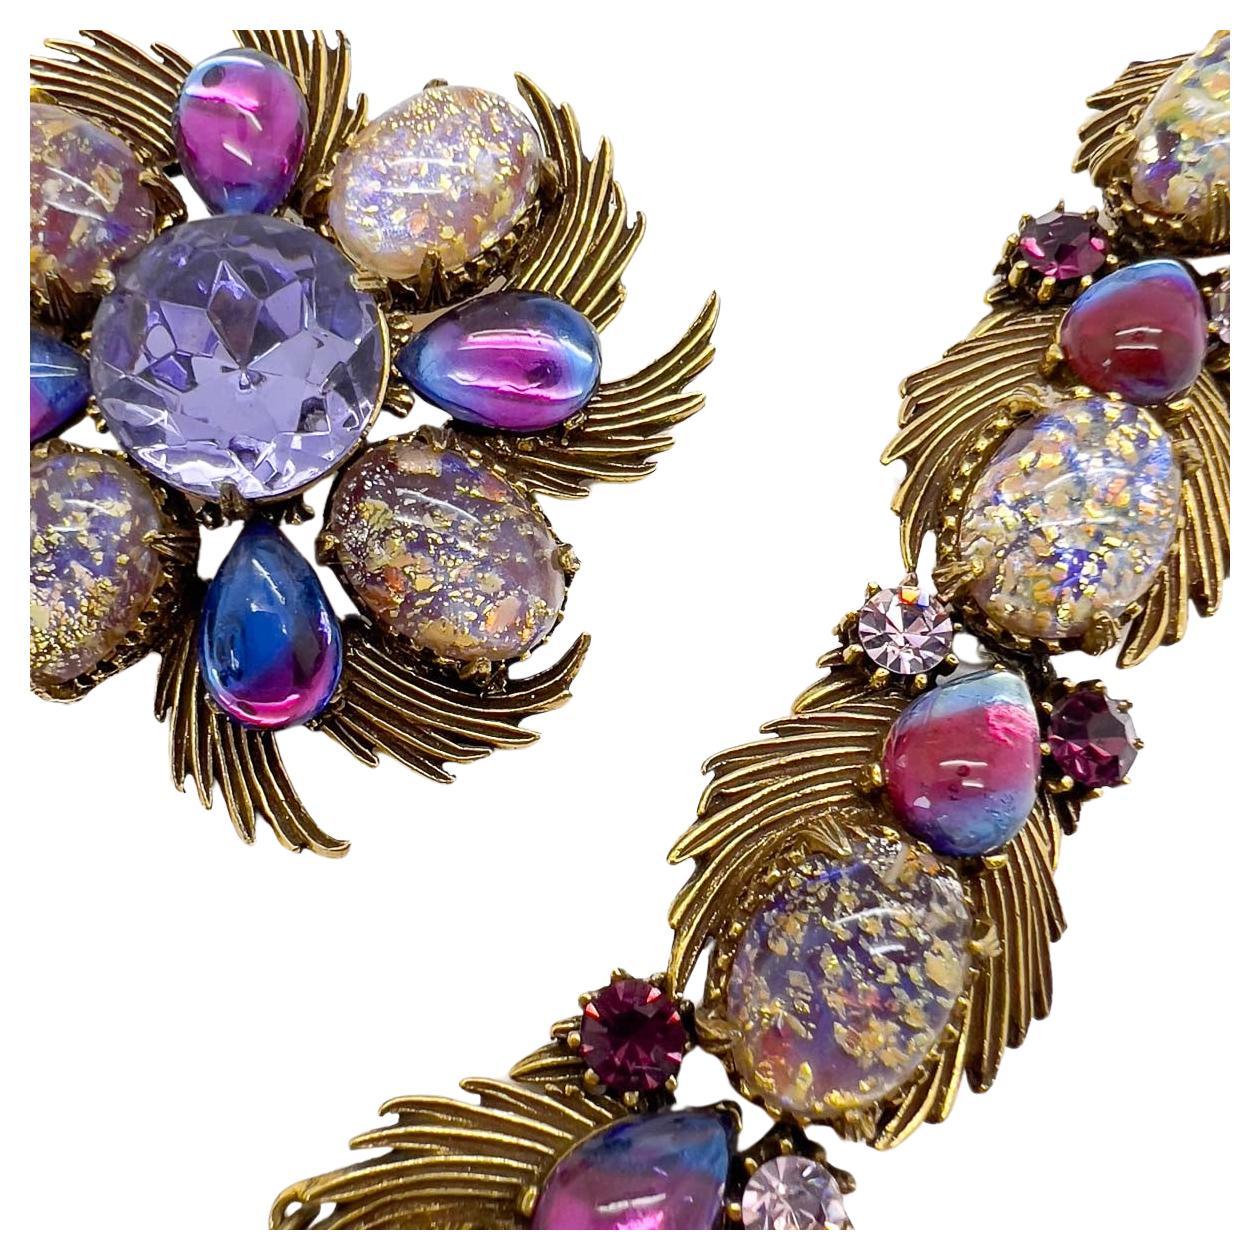 One of Florenza's best suites, this Vintage Florenza Dragons Breath Bracelet and matching pinwheel brooch are exquisite works of wearable art. The stones, the metalwork, the design, every detail is attended to in the most sumptuous way. A suite for